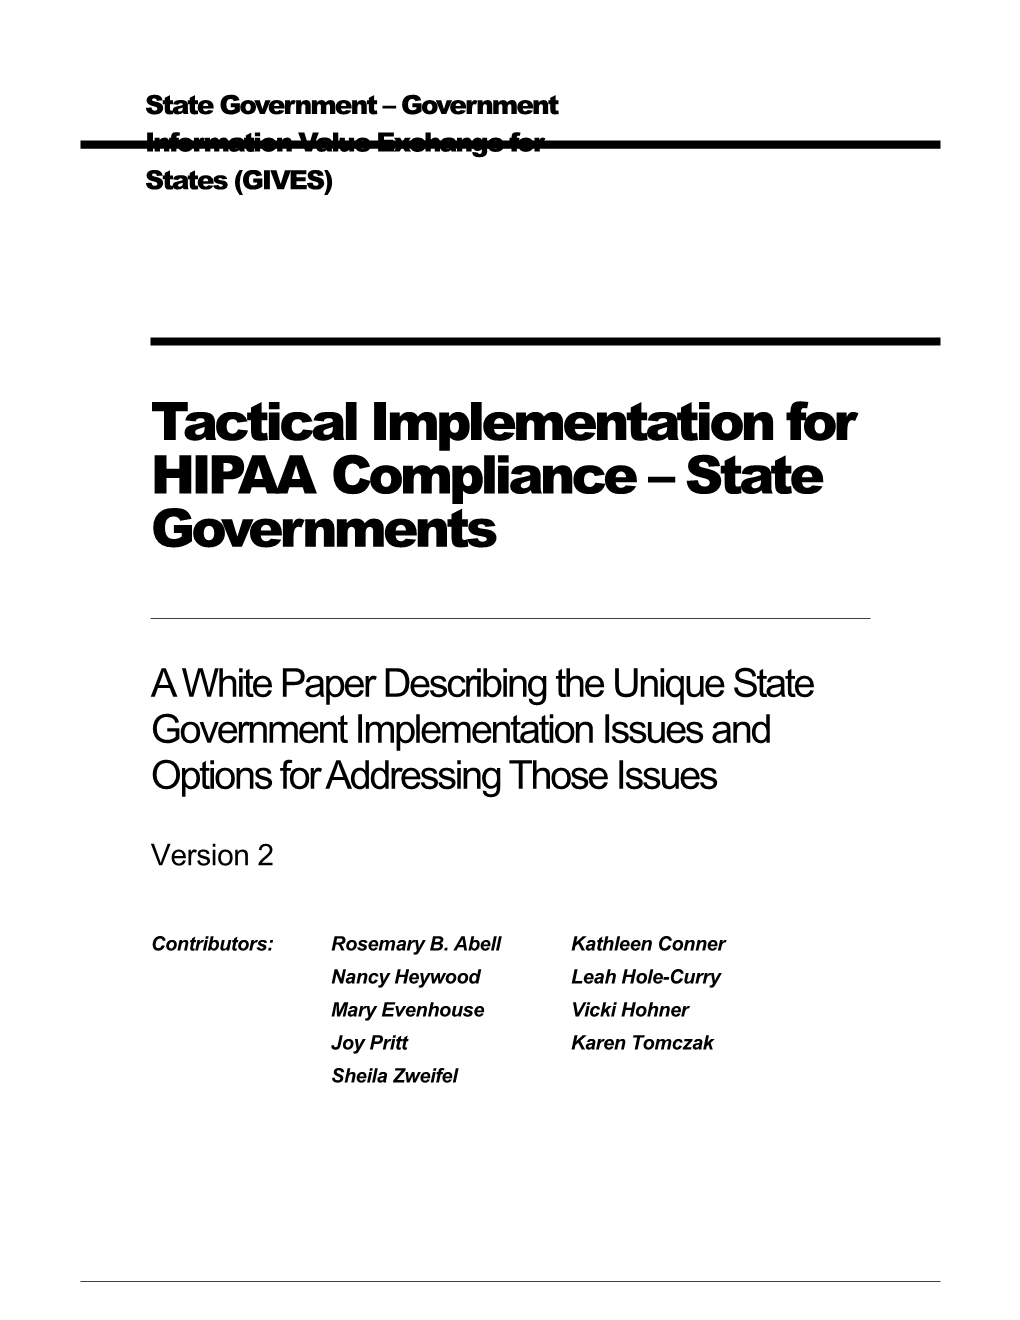 Tactical Implementation for HIPAA Compliance State Governments